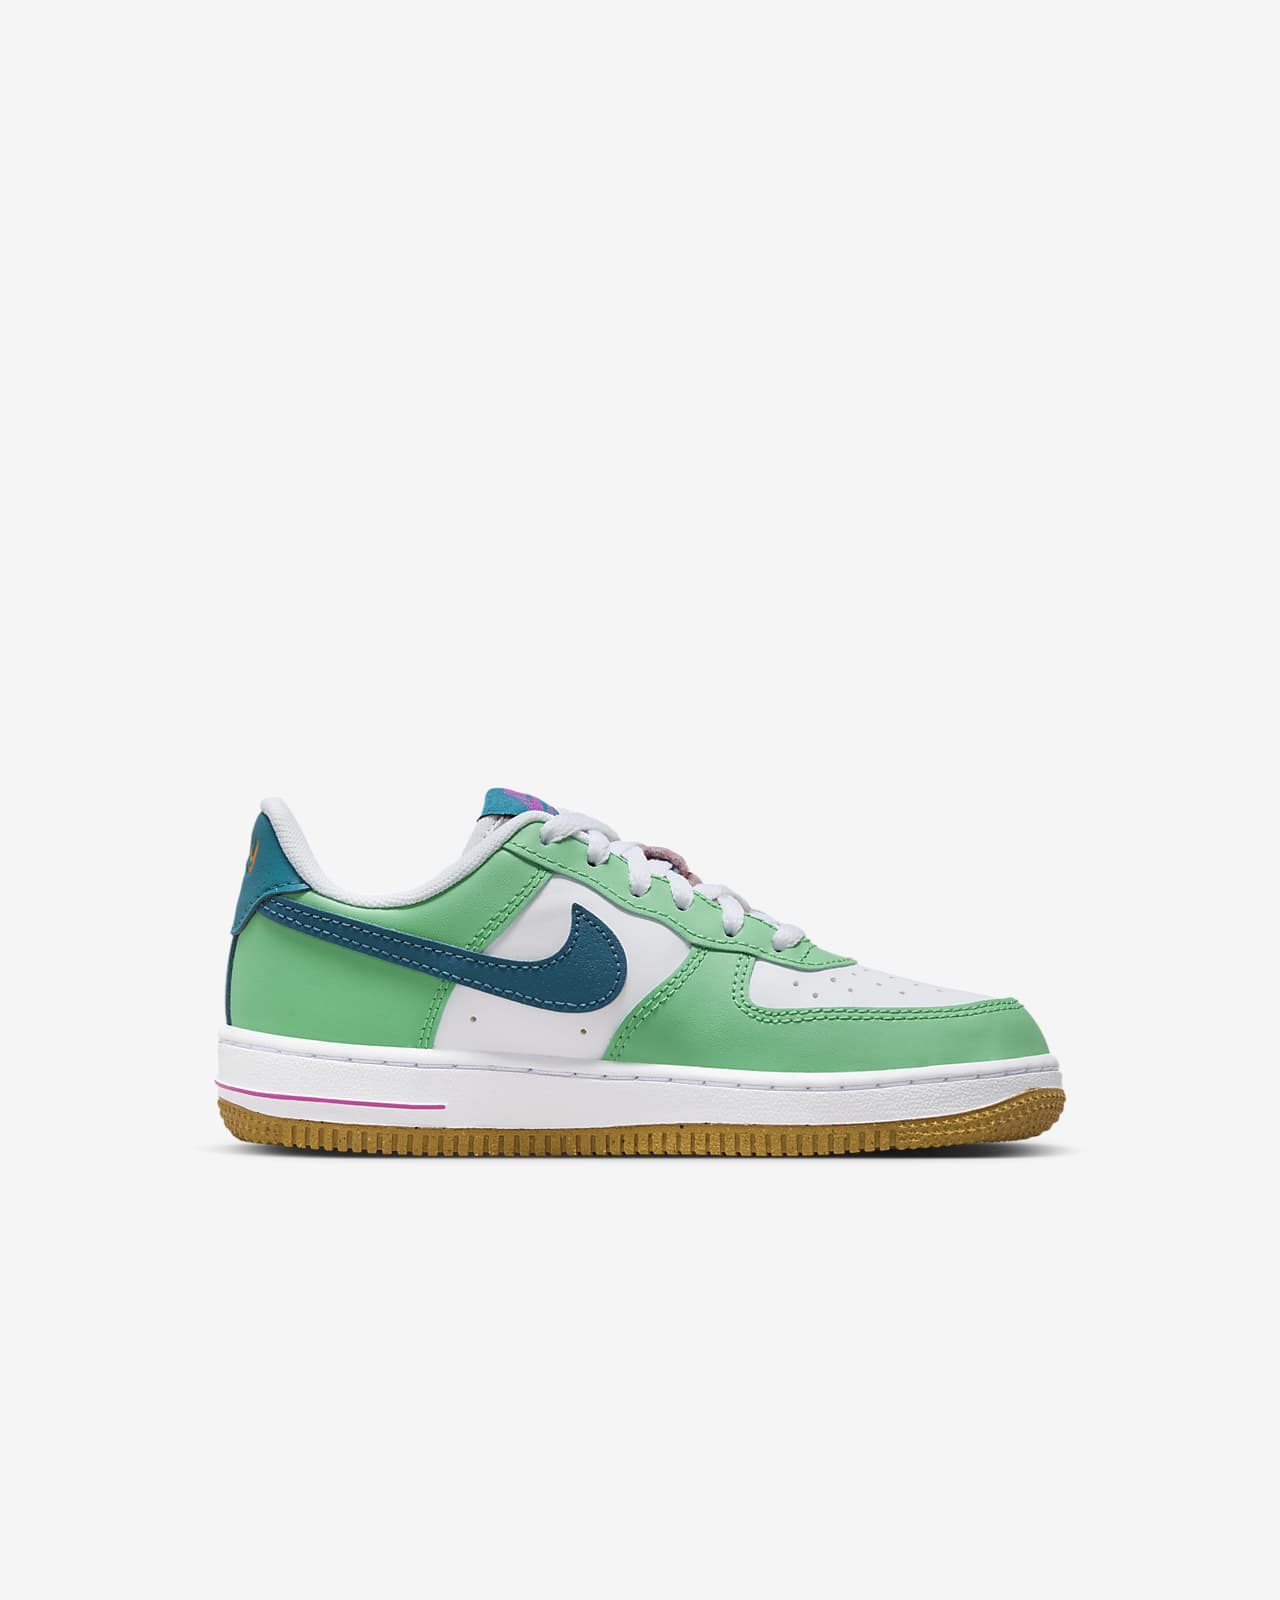 Nike Kids Volt Neon Green Yellow Air Force One LV8 Low UV Highlight